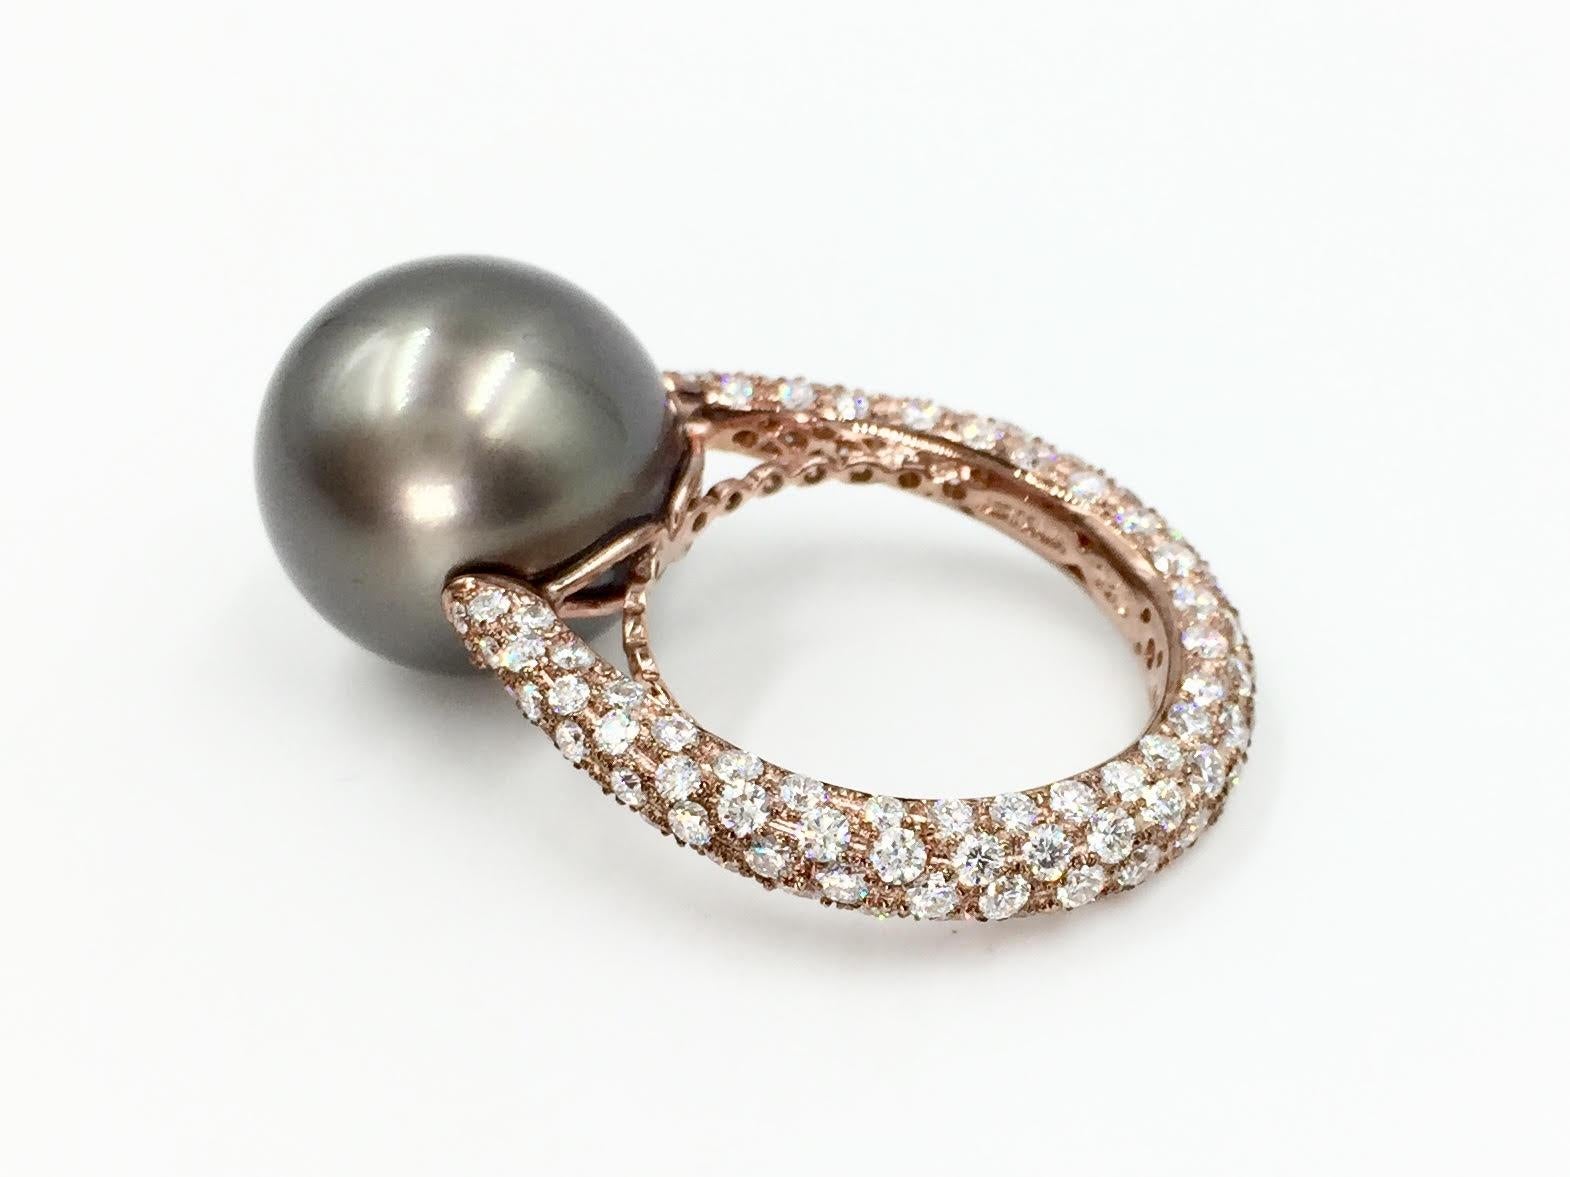 Exceptional quality from high jewelry designer, J. Stella. A total weight of 2.29 carats of round brilliant diamonds are perfectly pavé set on all three sides of the shank of the ring. The 14mm natural Tahitian pearl has an unexpected yet stunning